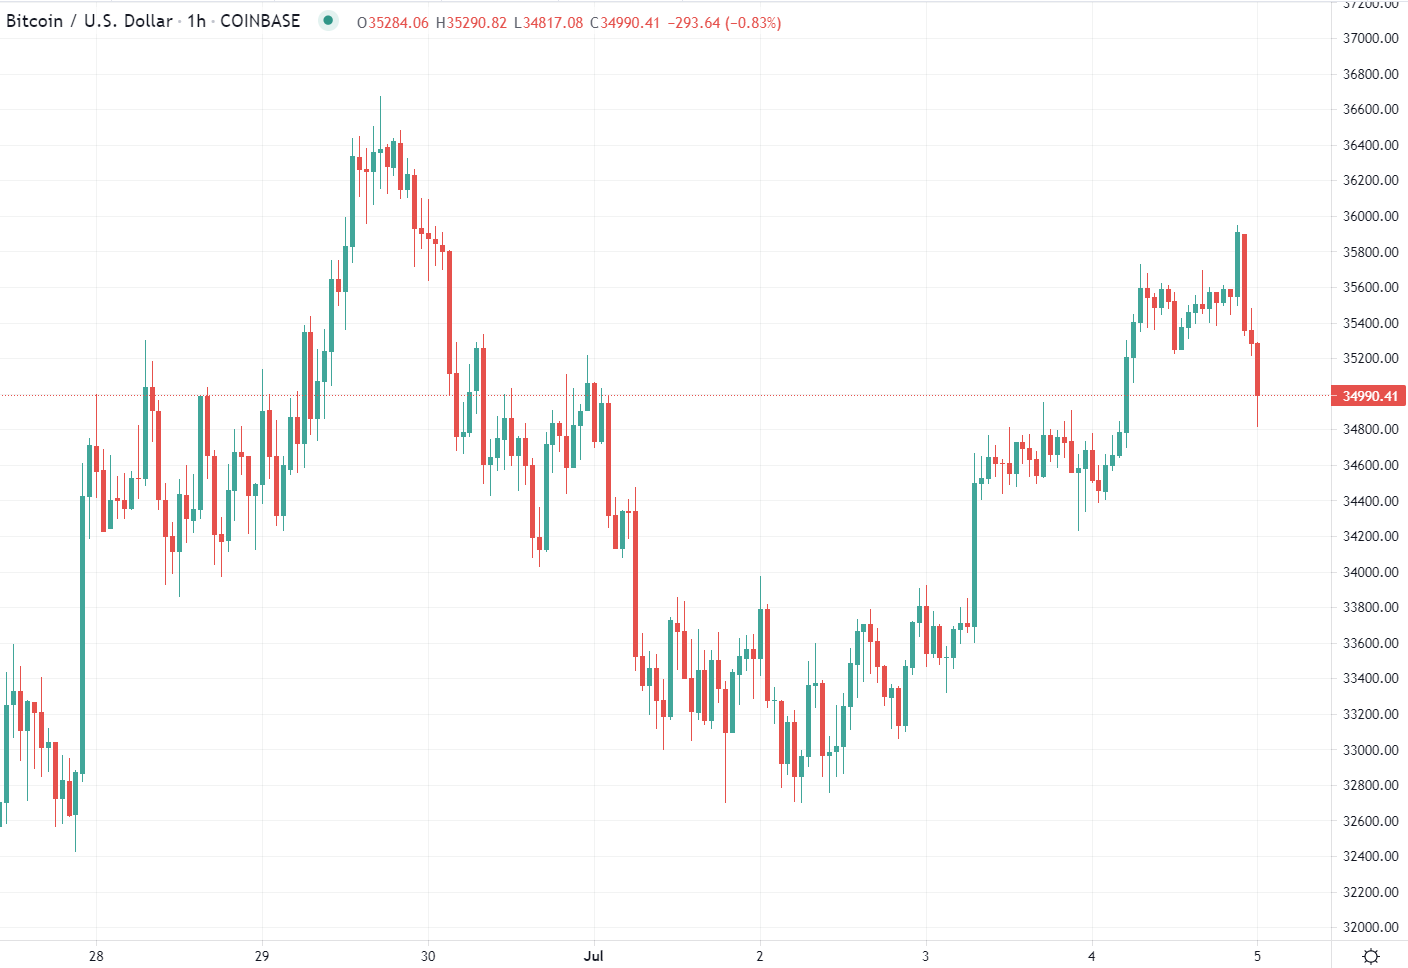 An update on BTC/USD, after it gained towards $36K a couple of hours ago its rapidly lost $1K to be back under $35,000